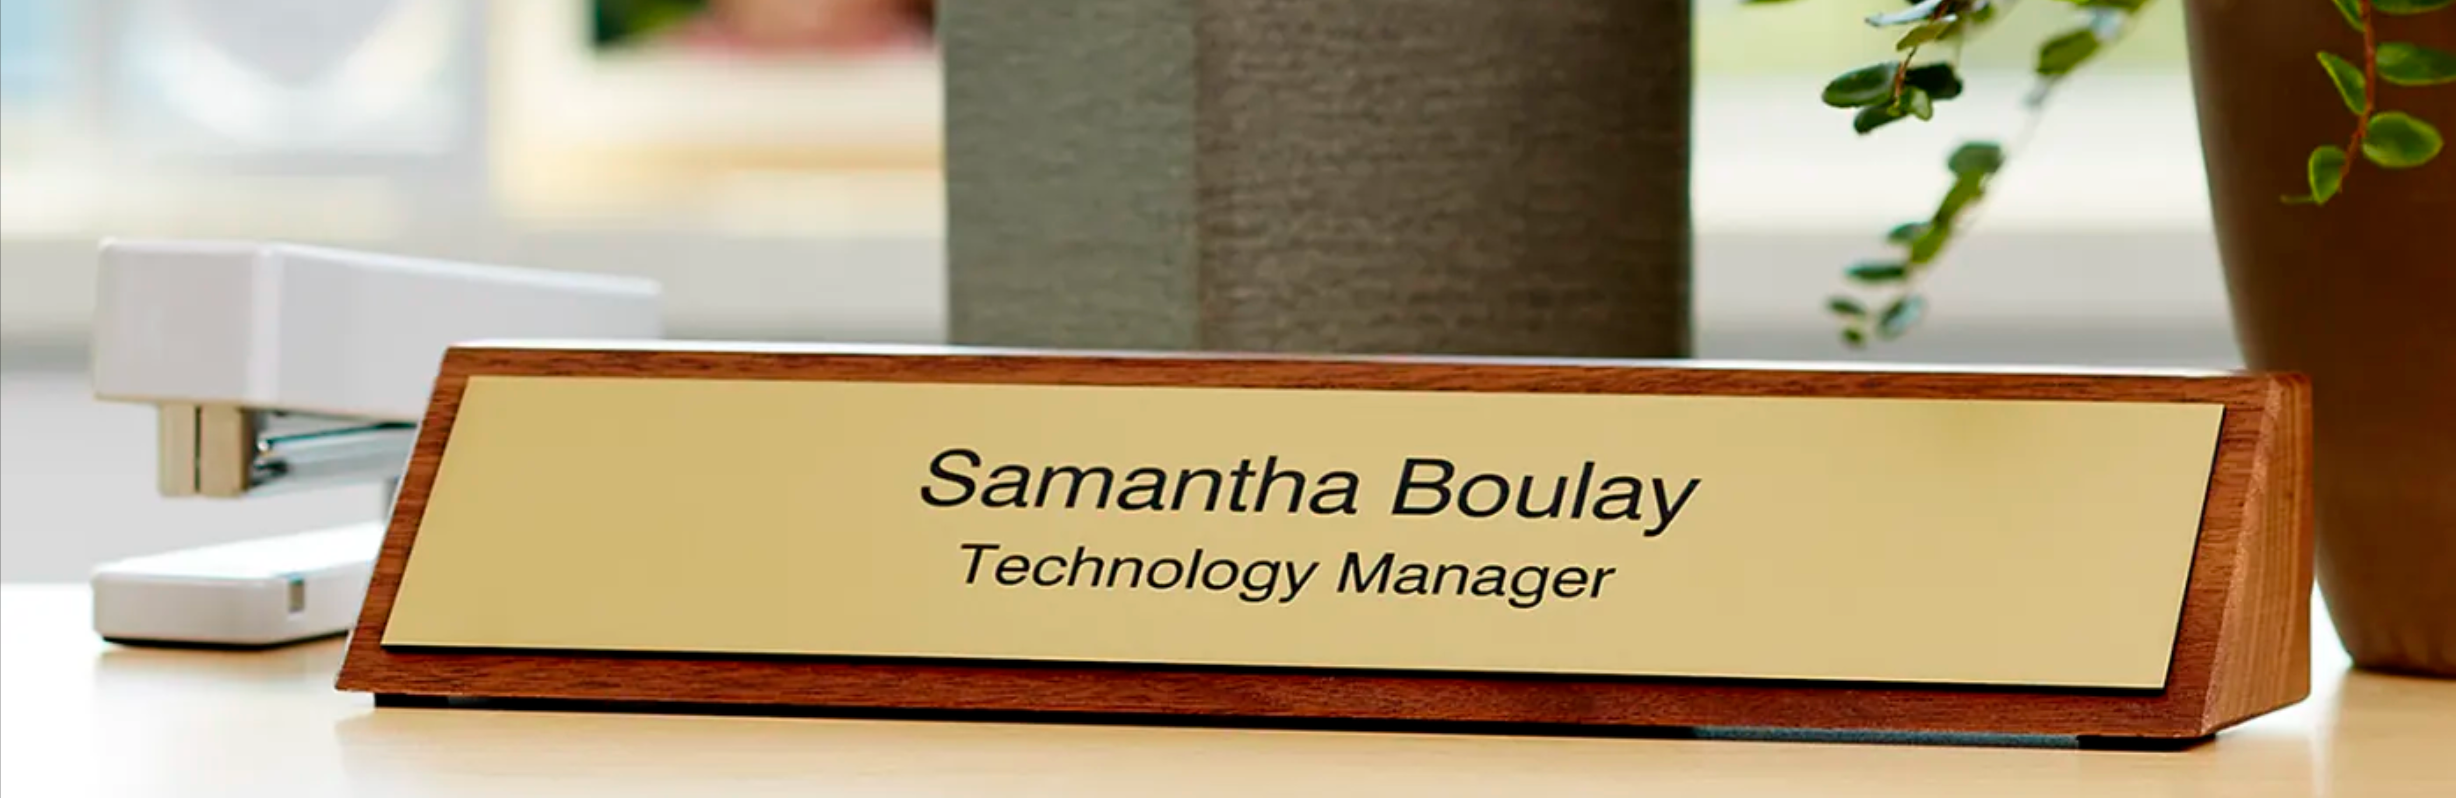 Our Top 5 Office Name Plates